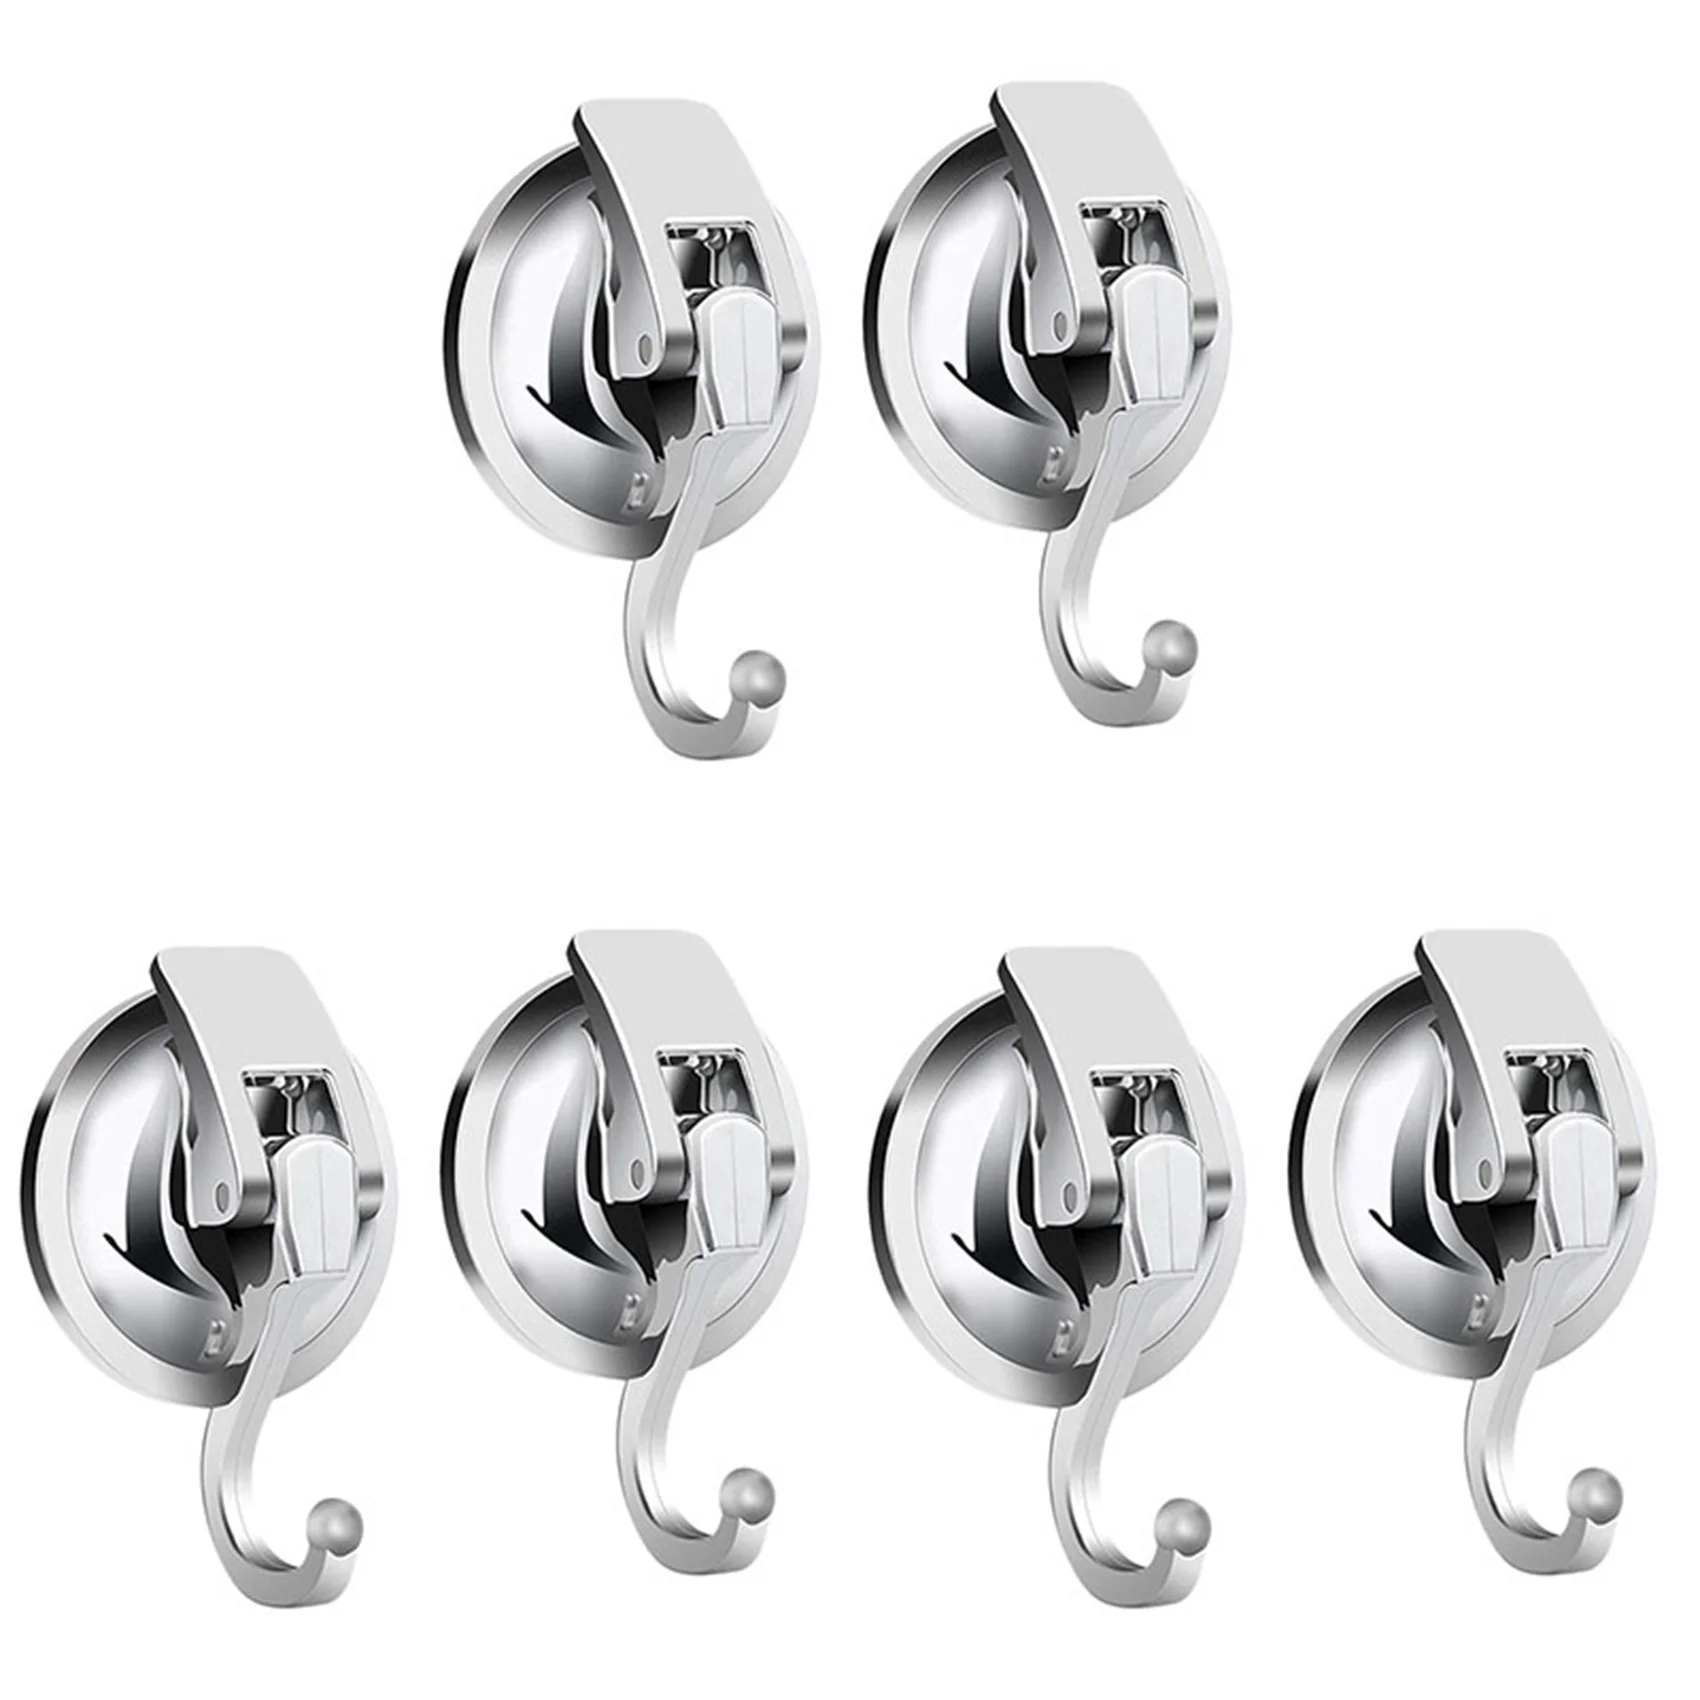 

Heavy Duty Vacuum Suction Cup Hooks (6 Pack) Specialized for Kitchen Bathroom Restroom Organization